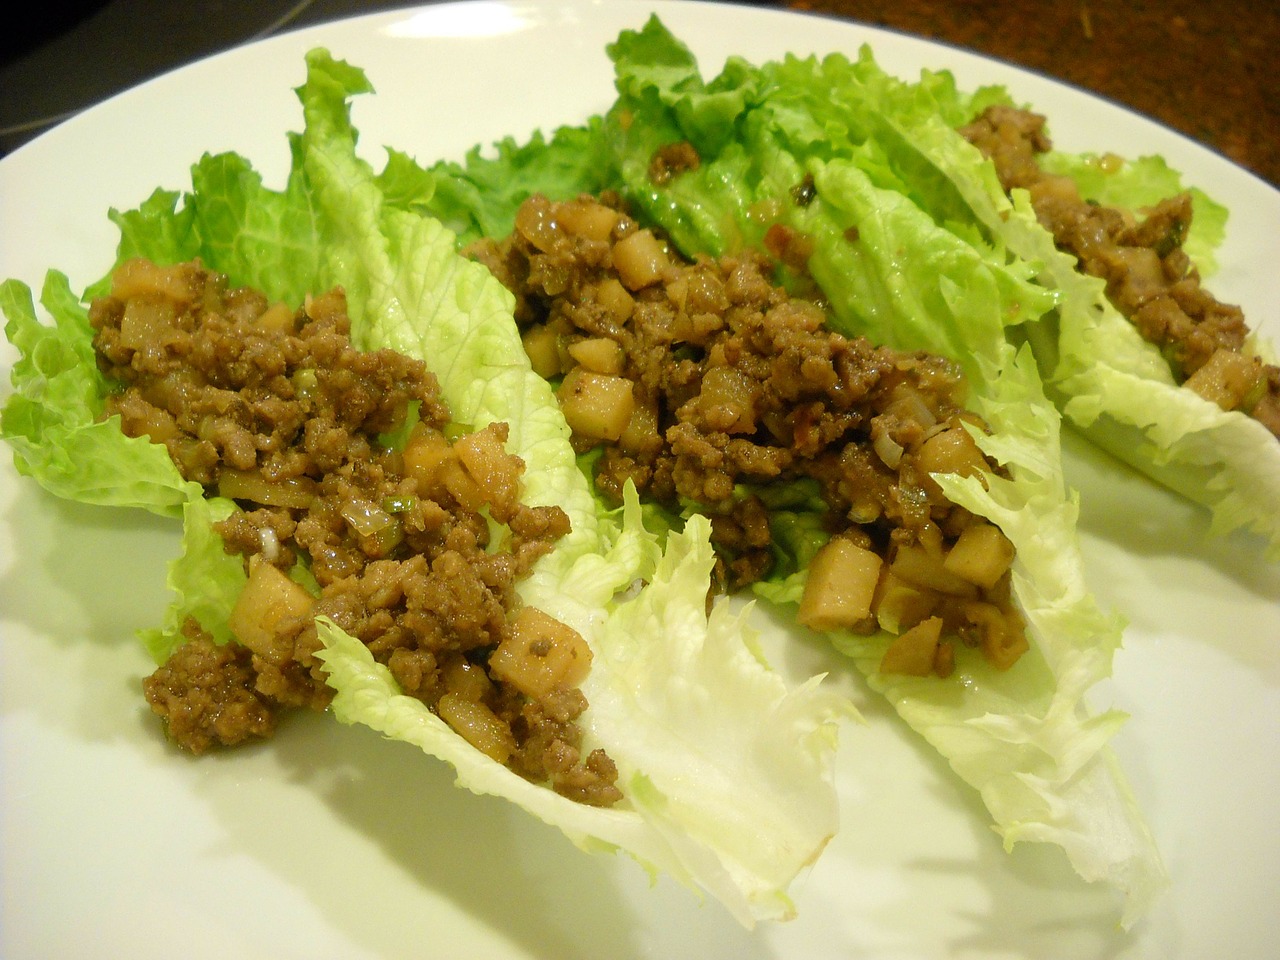 Asian Roll Lettuce Wrap Fun for the Entire Family!